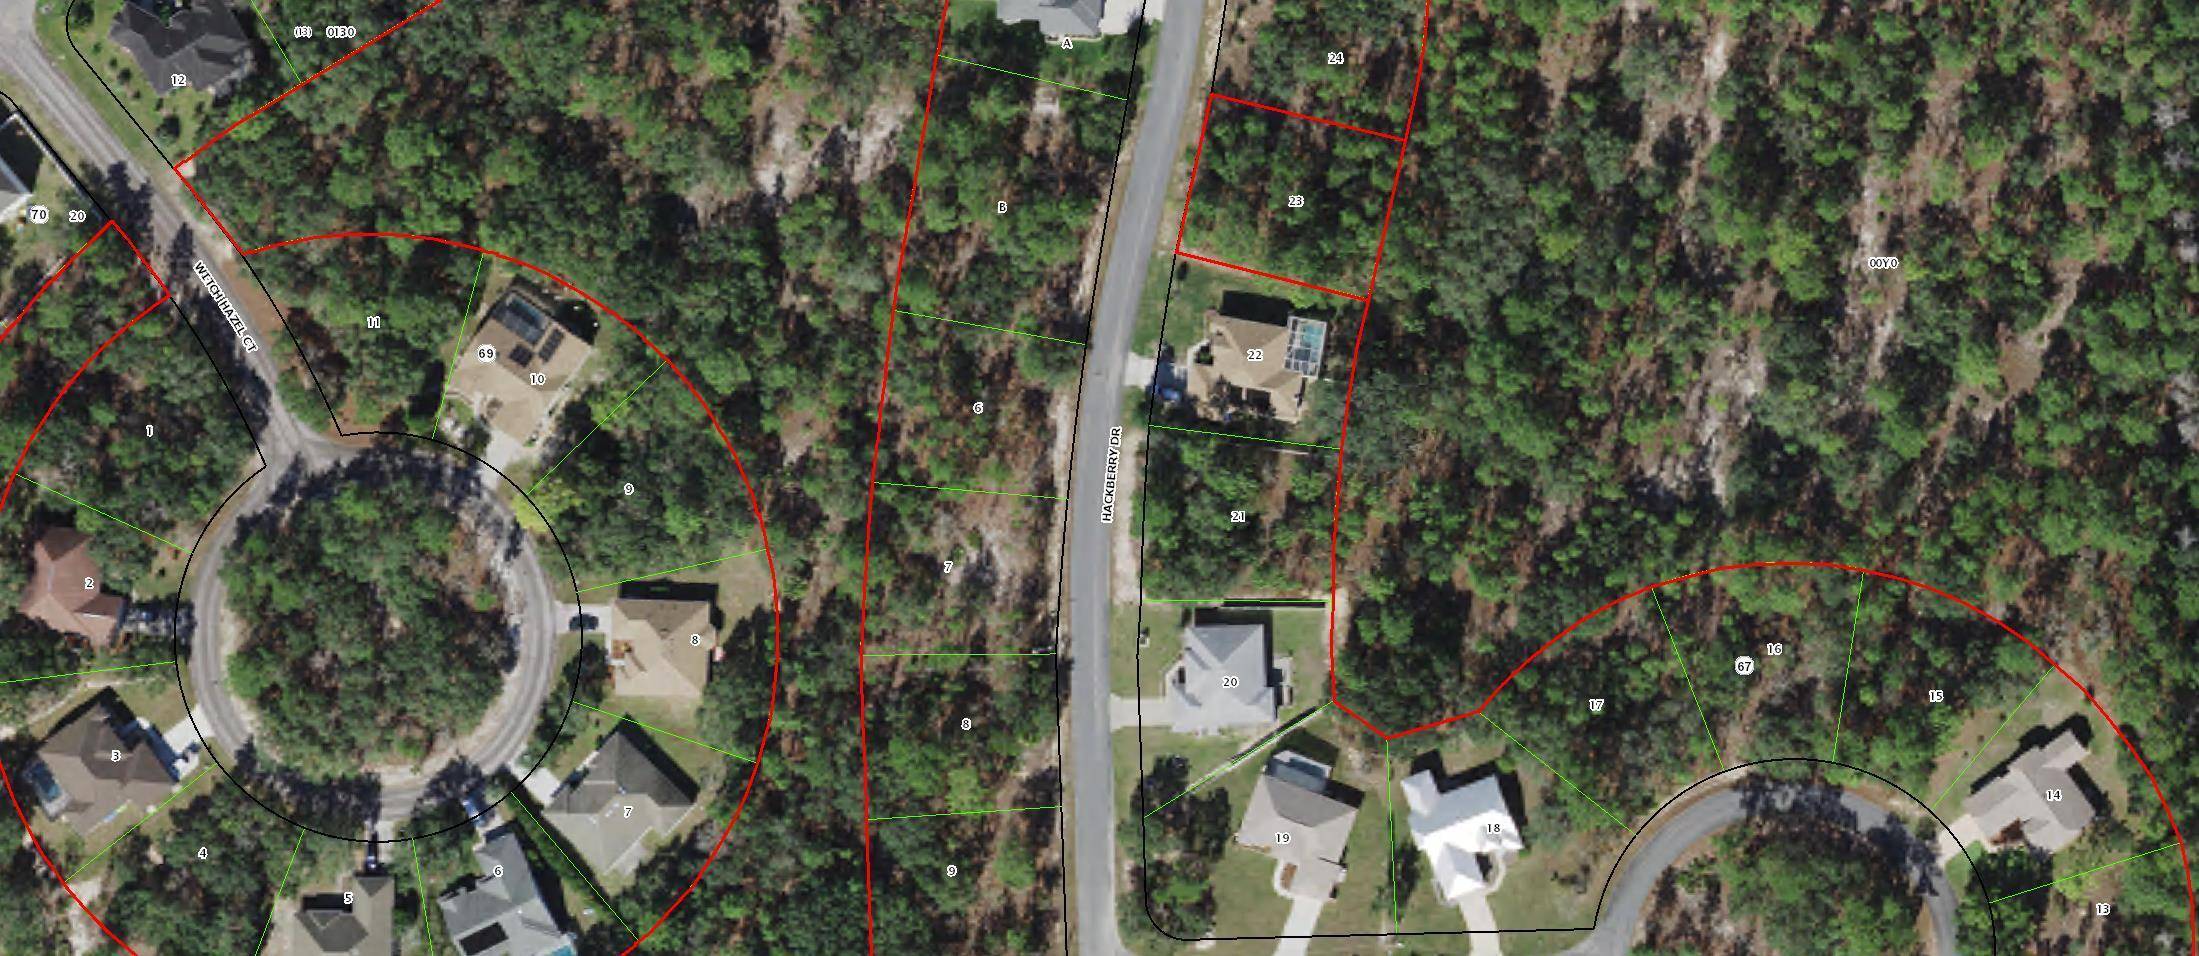 Cypress Village of Sugarmill Woods is a Deed Restricted Community within the Sugarmill Woods.